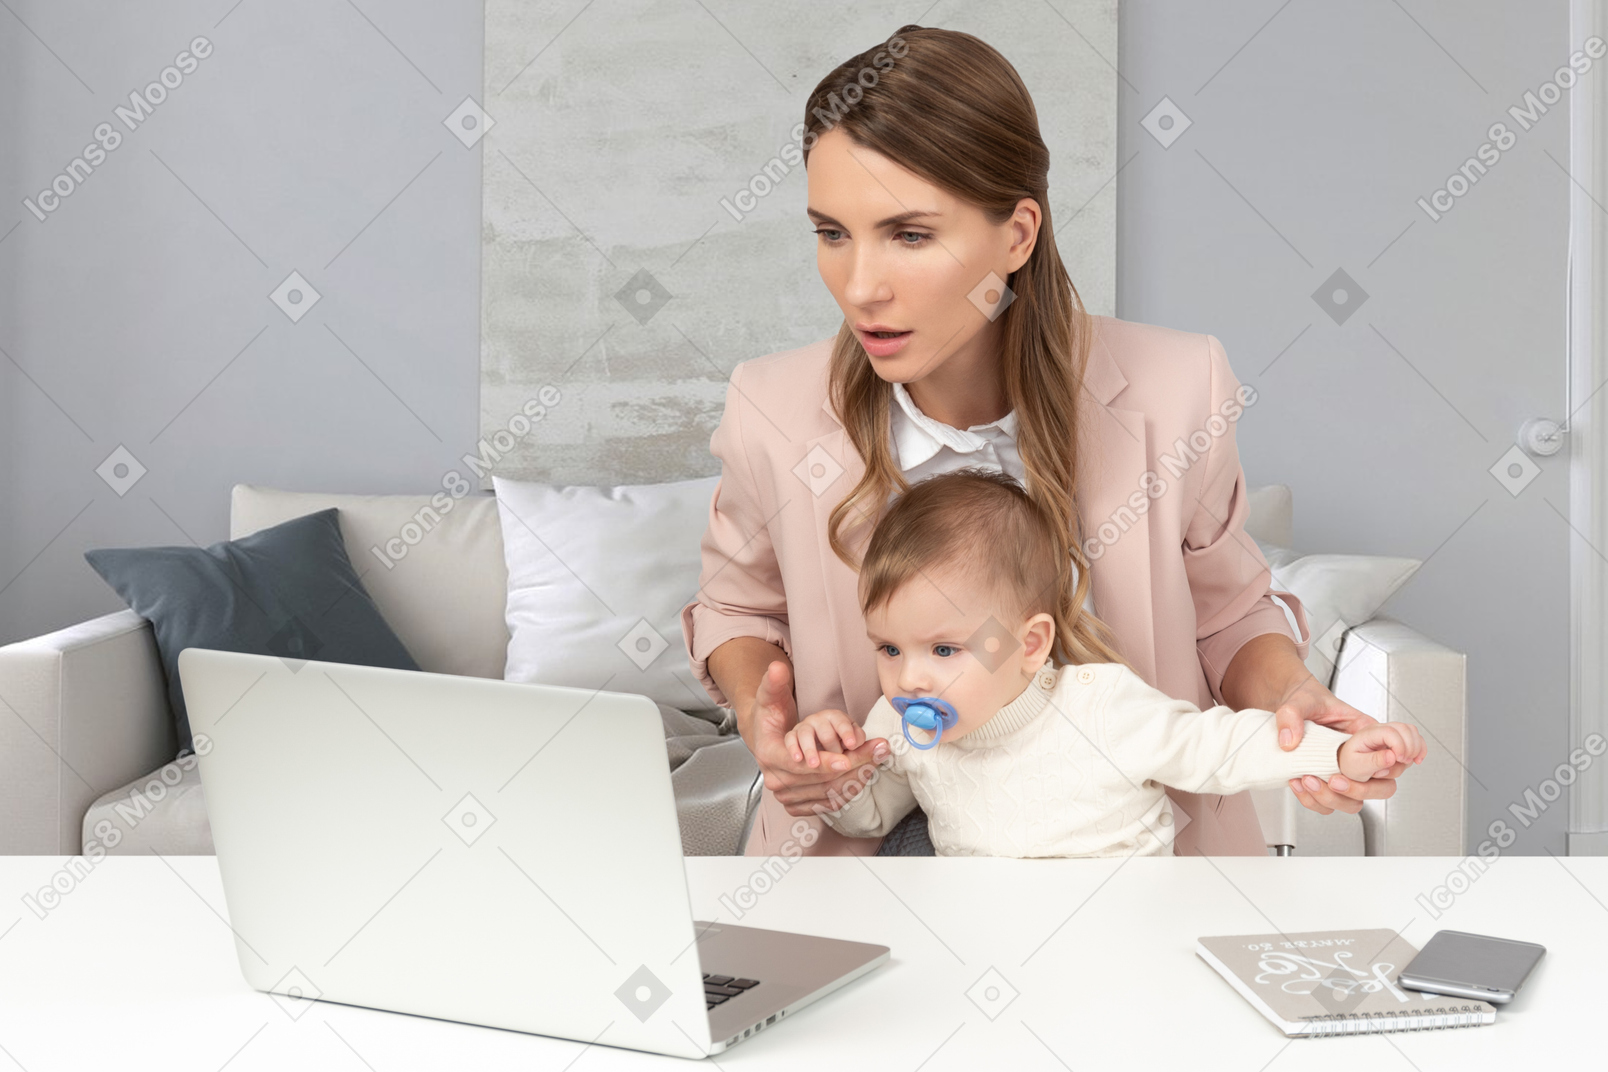 Mother and baby working on a laptop